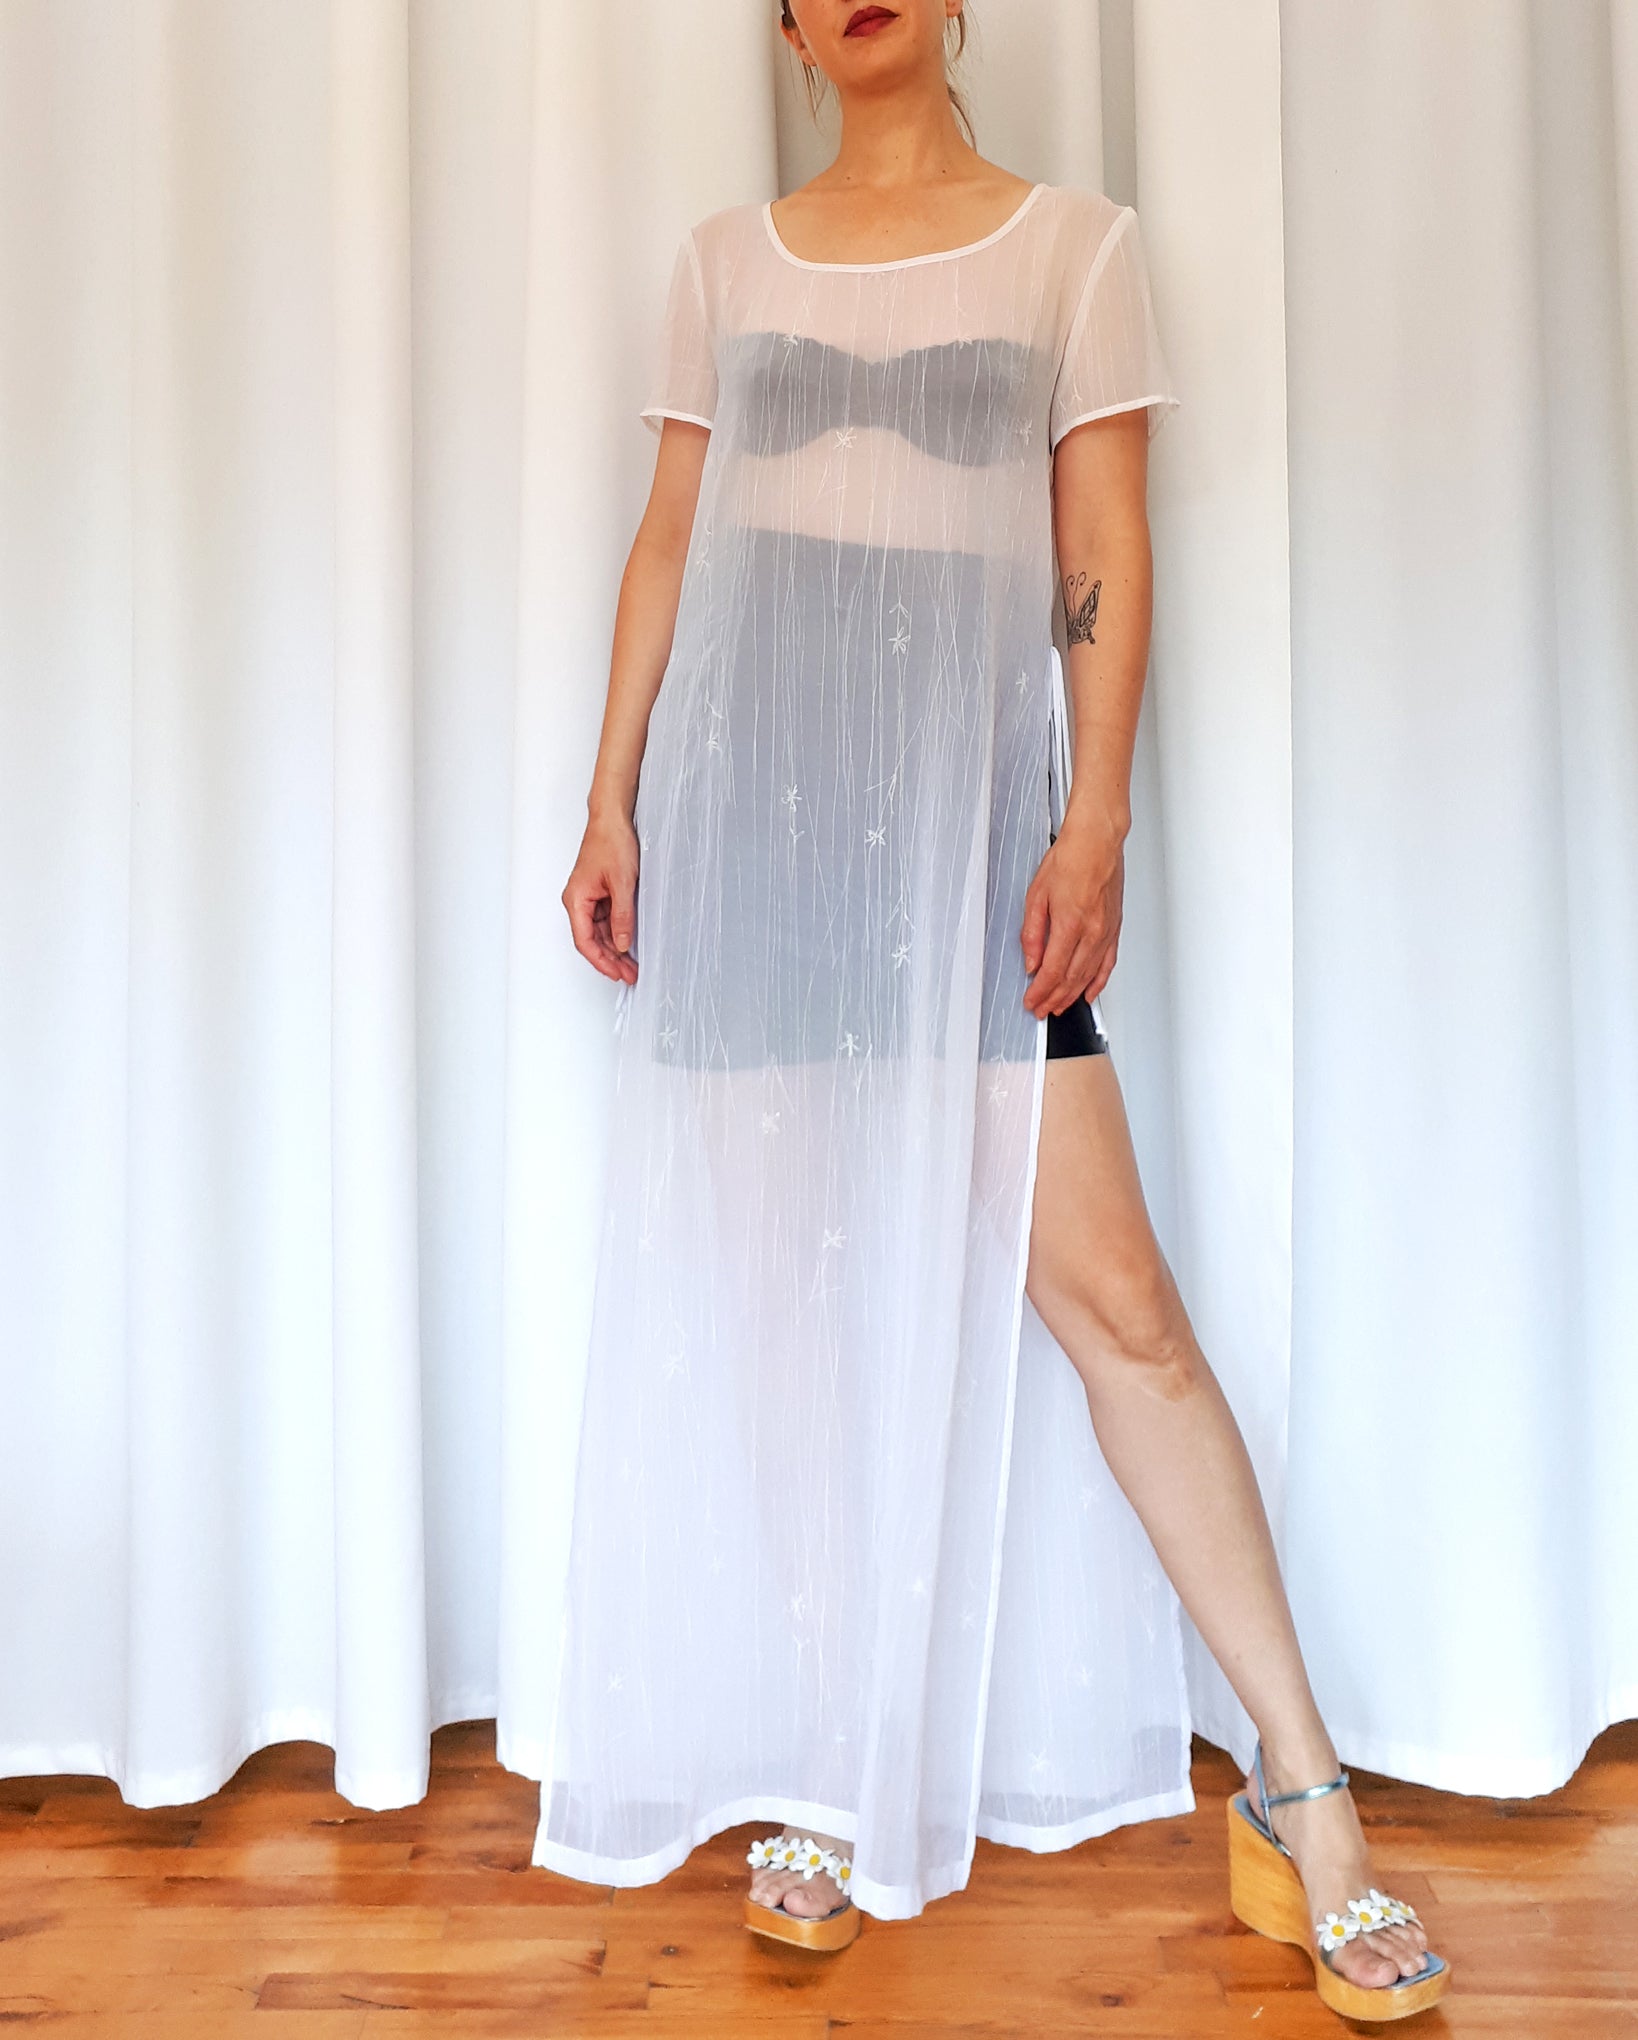 Vintage 90s Long White Maxi Sheer Dress With High Side Openings.